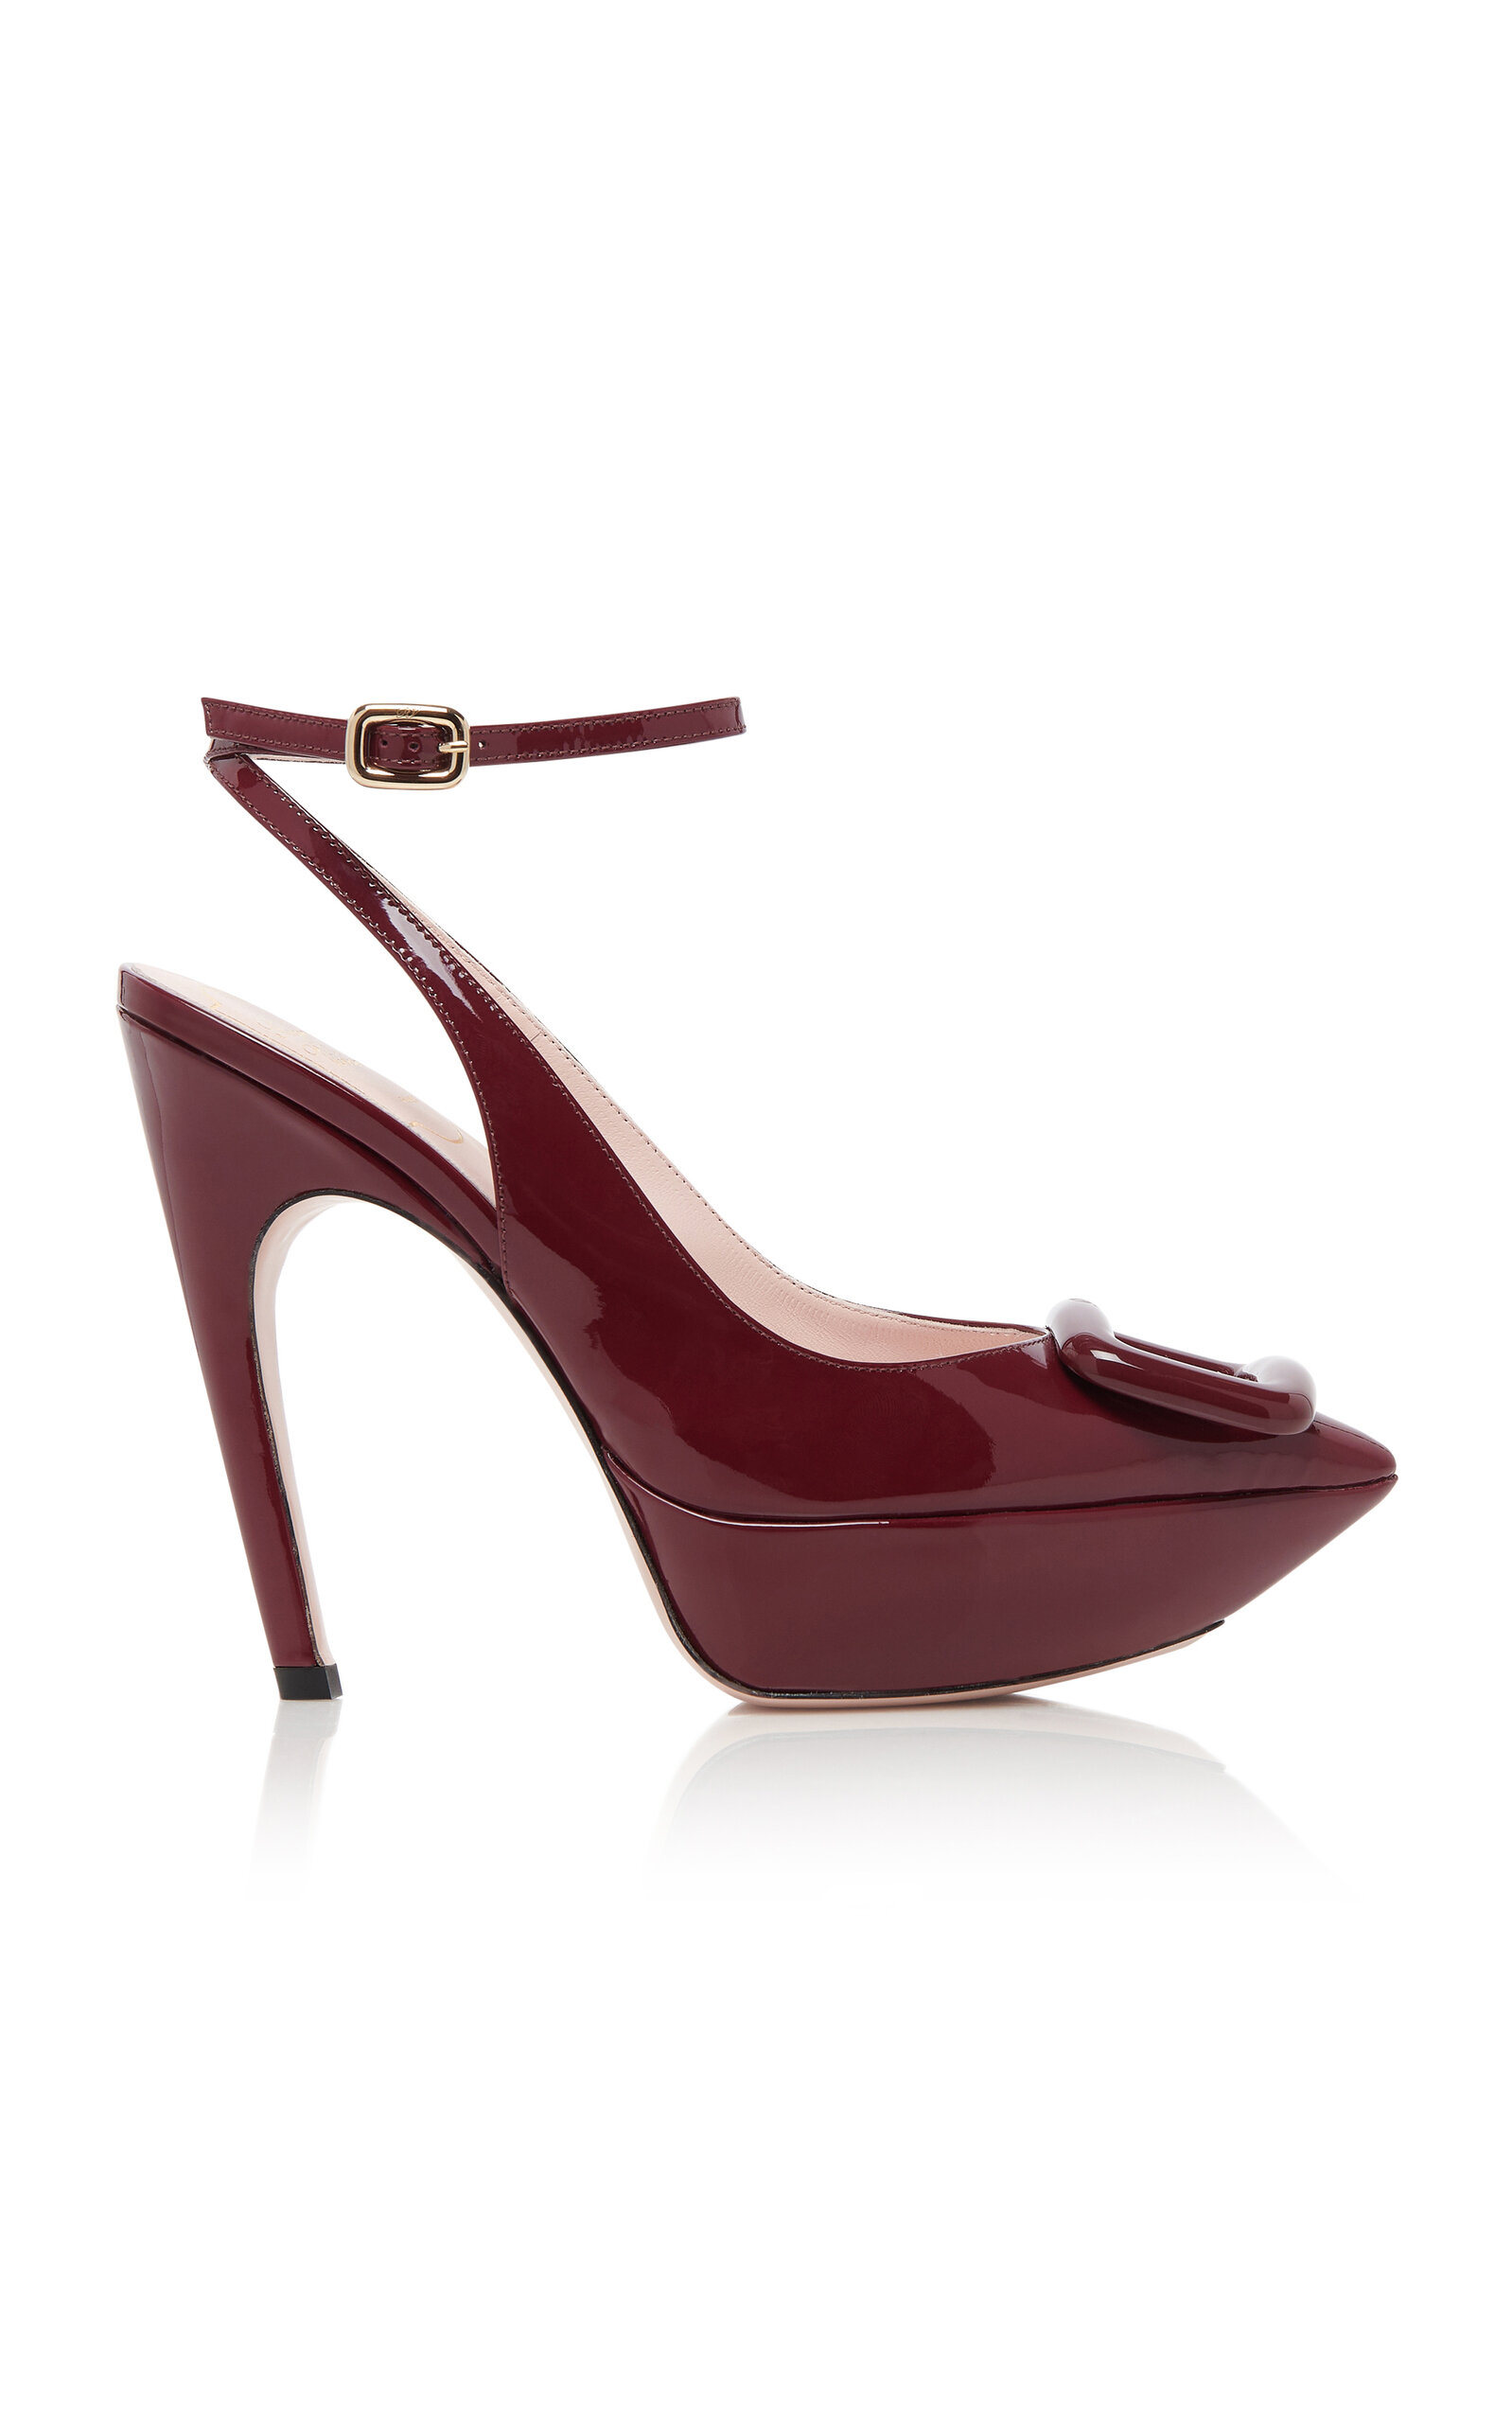 Roger Vivier Women's Choc Buckle Patent Pumps In Red